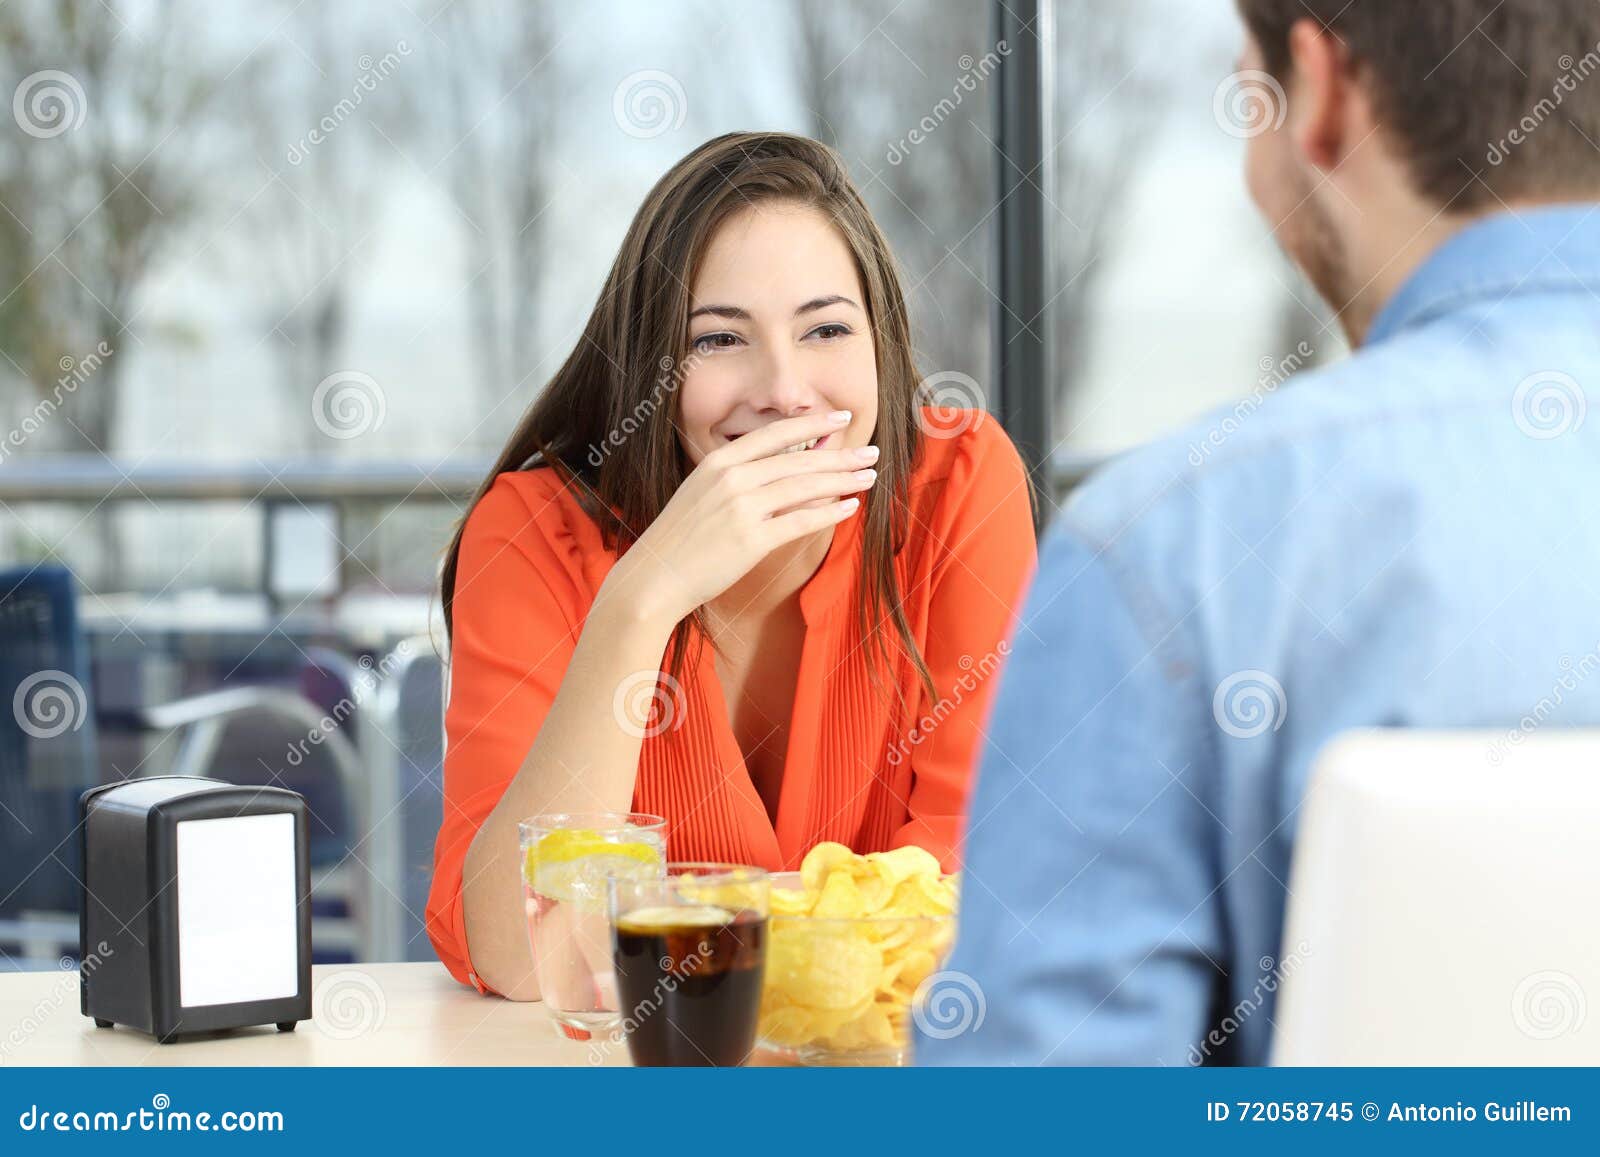 woman covering her mouth to hide smile or breath